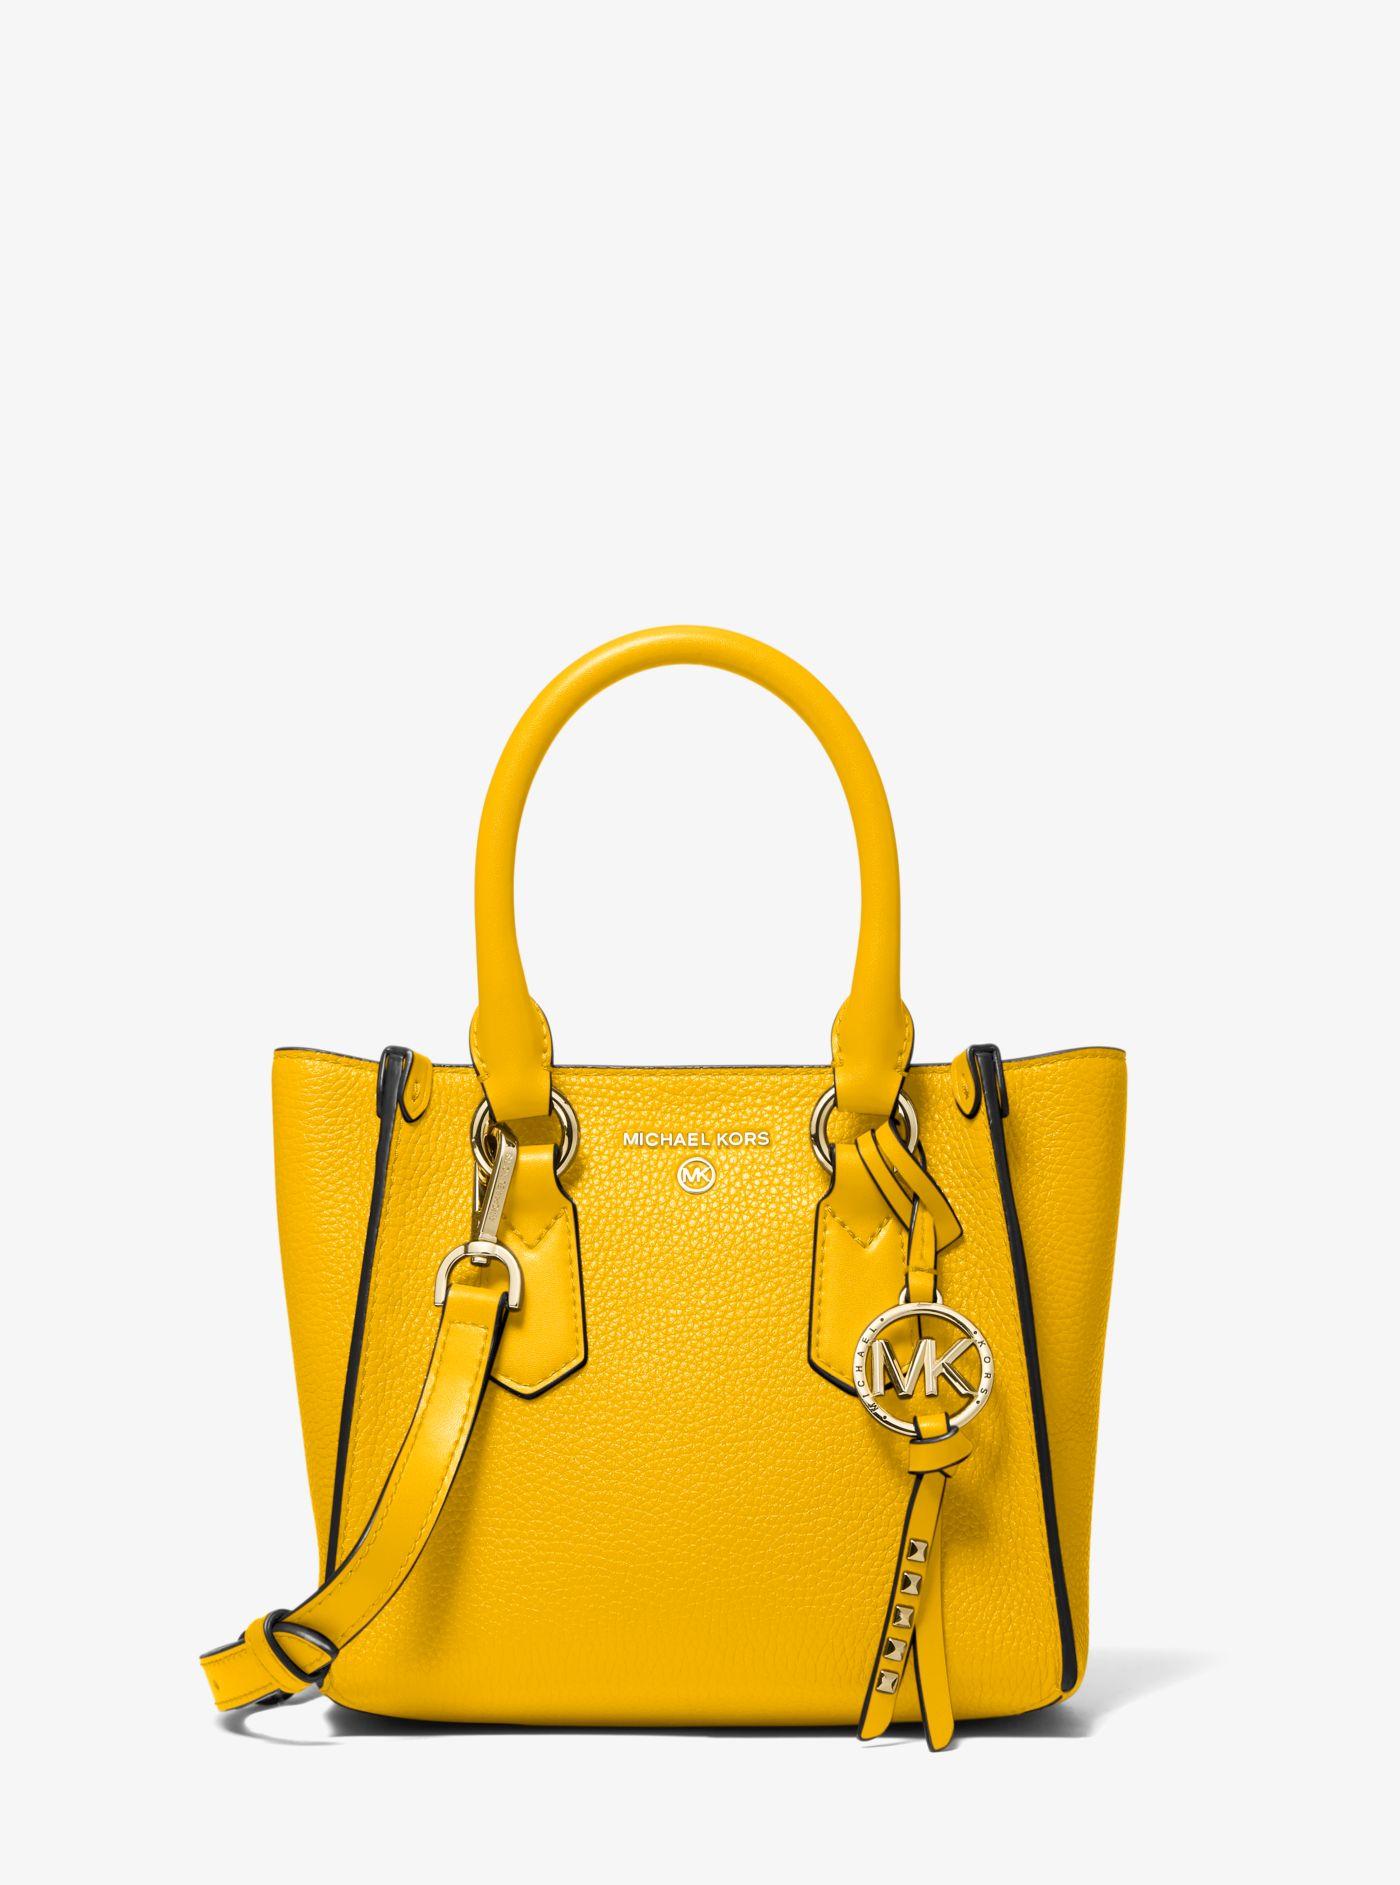 Michael Kors Kris Small Pebbled Leather Satchel in Yellow | Lyst